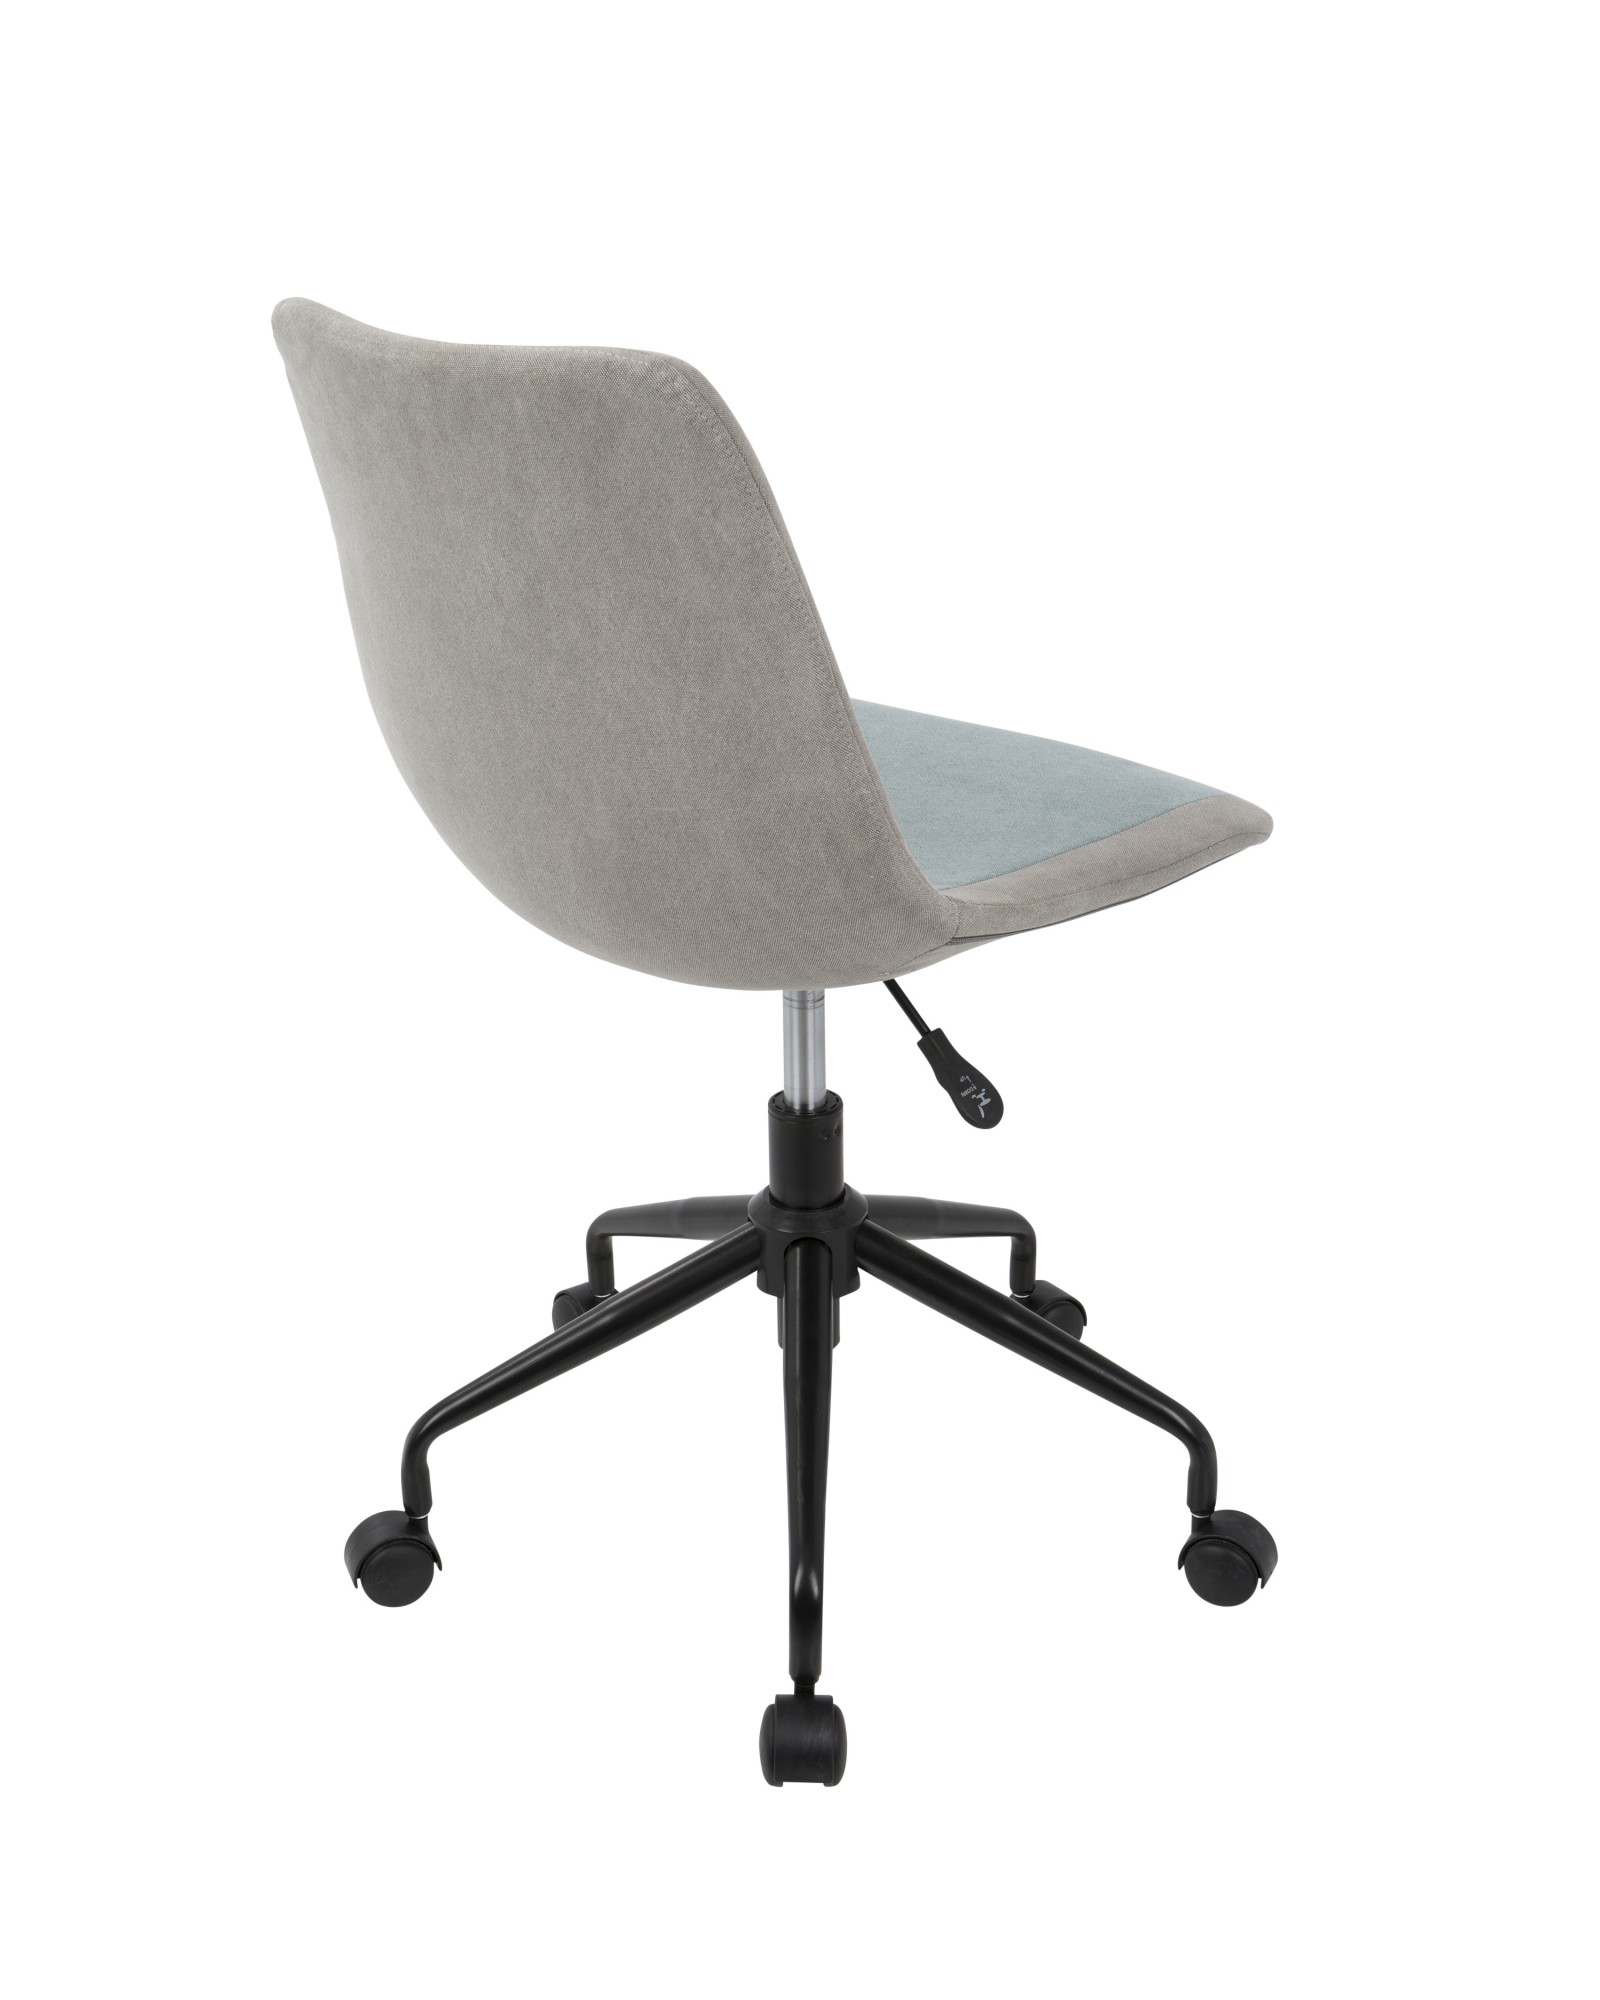 Orzo Height Adjustable Task Chair in Black with Blue Denim Fabric